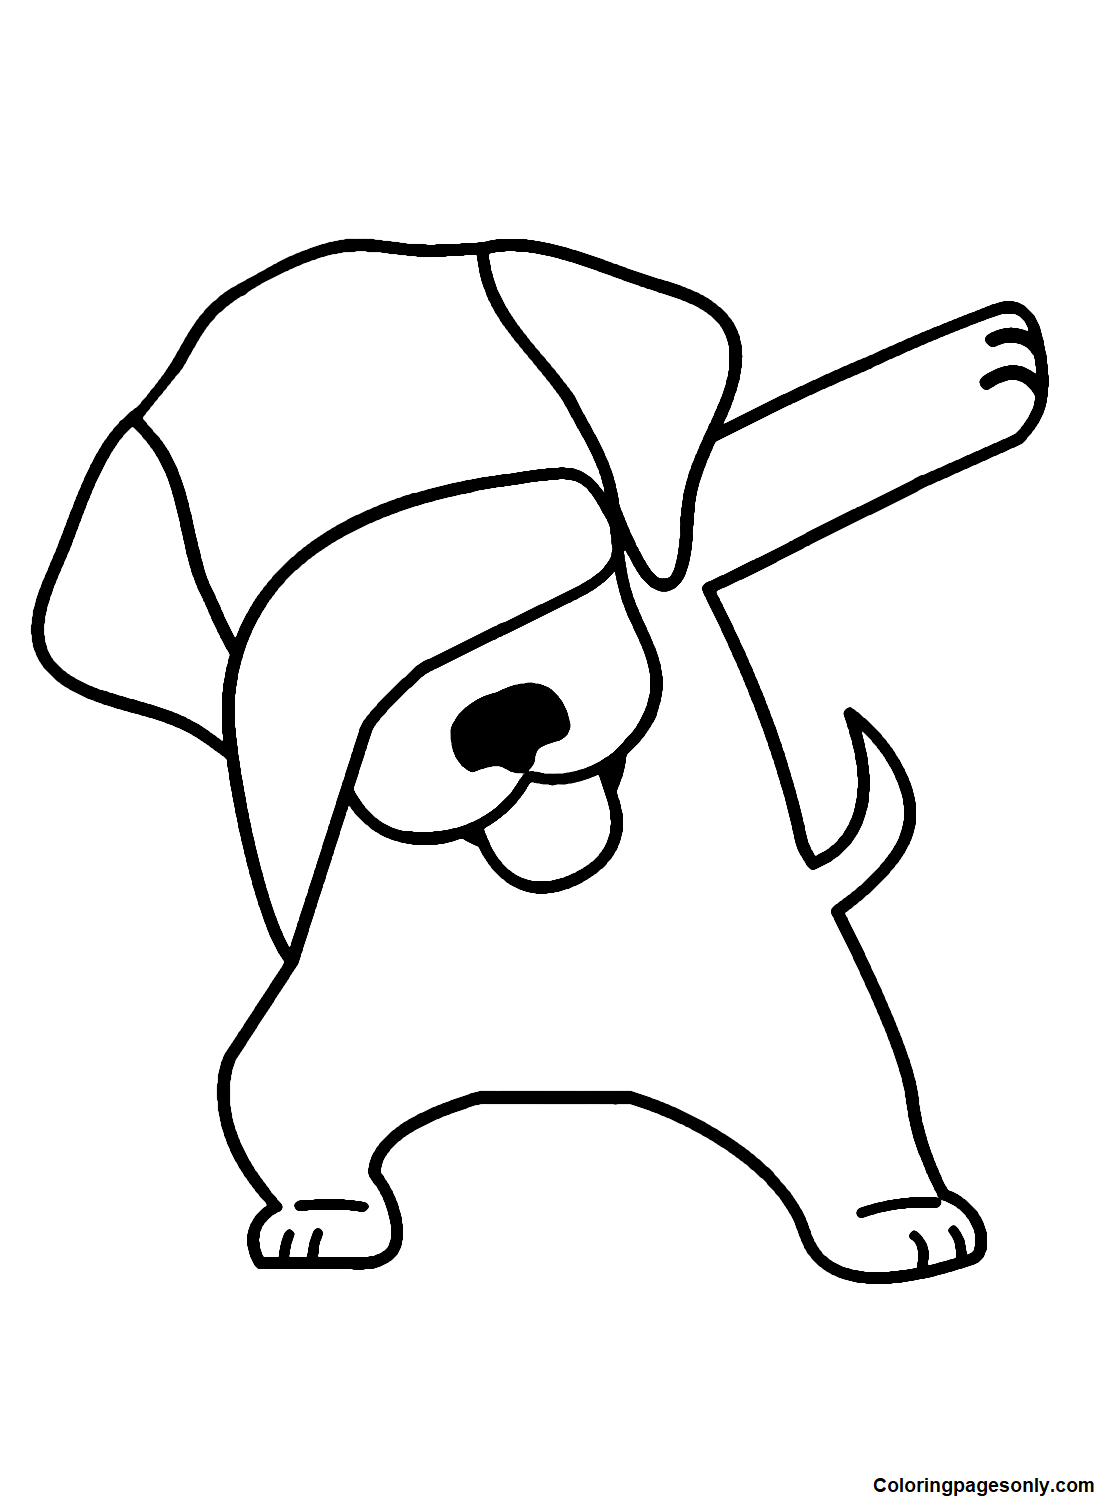 Funny Dancing Dog Coloring Page